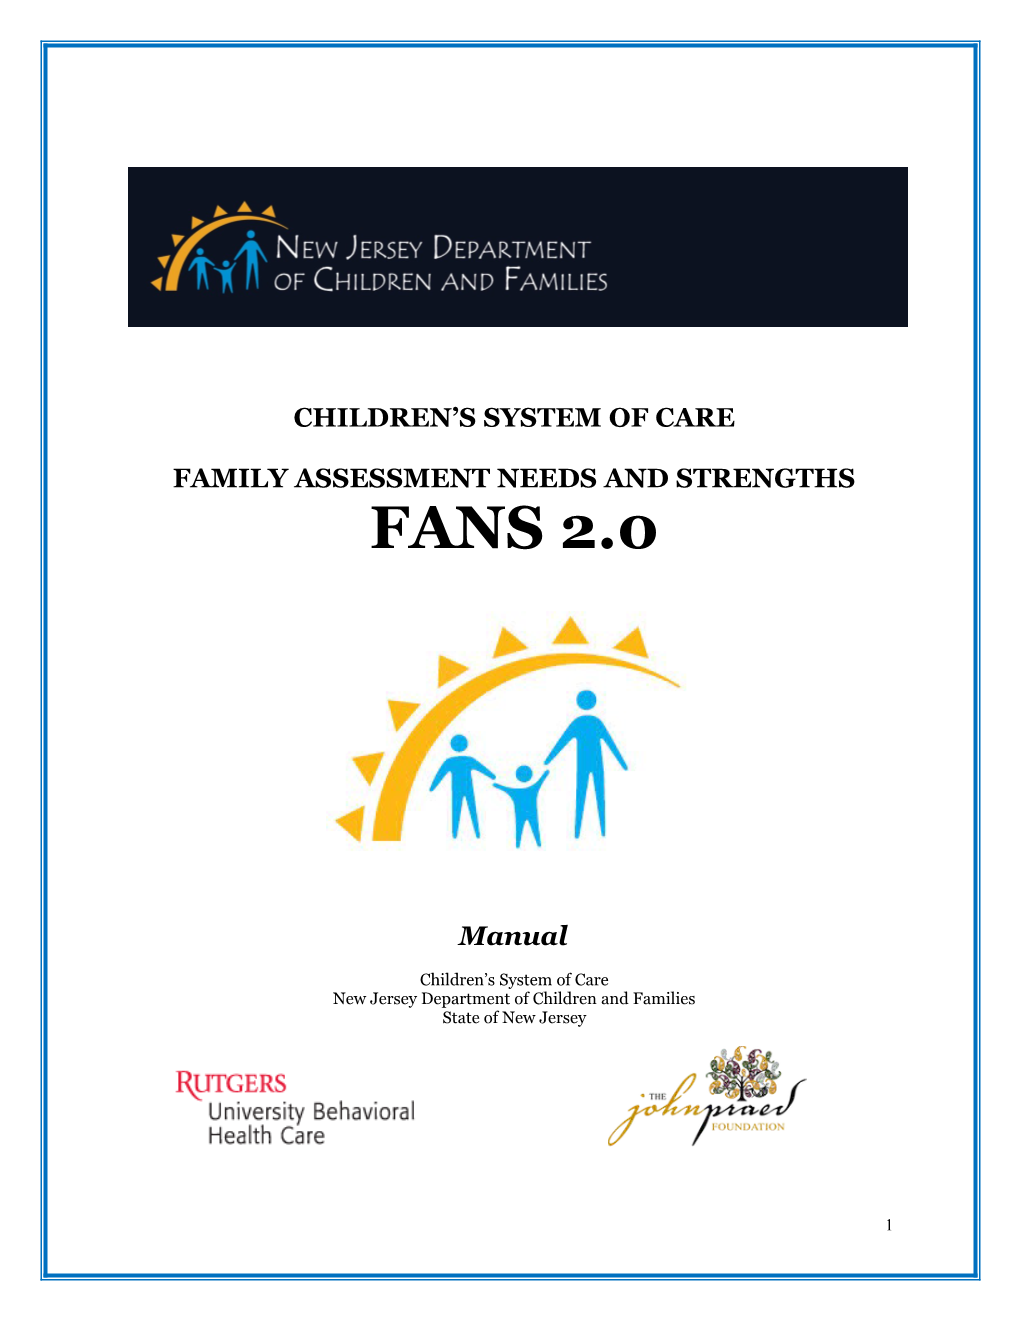 Family Assessment Needs and Strengths Fans 2.0